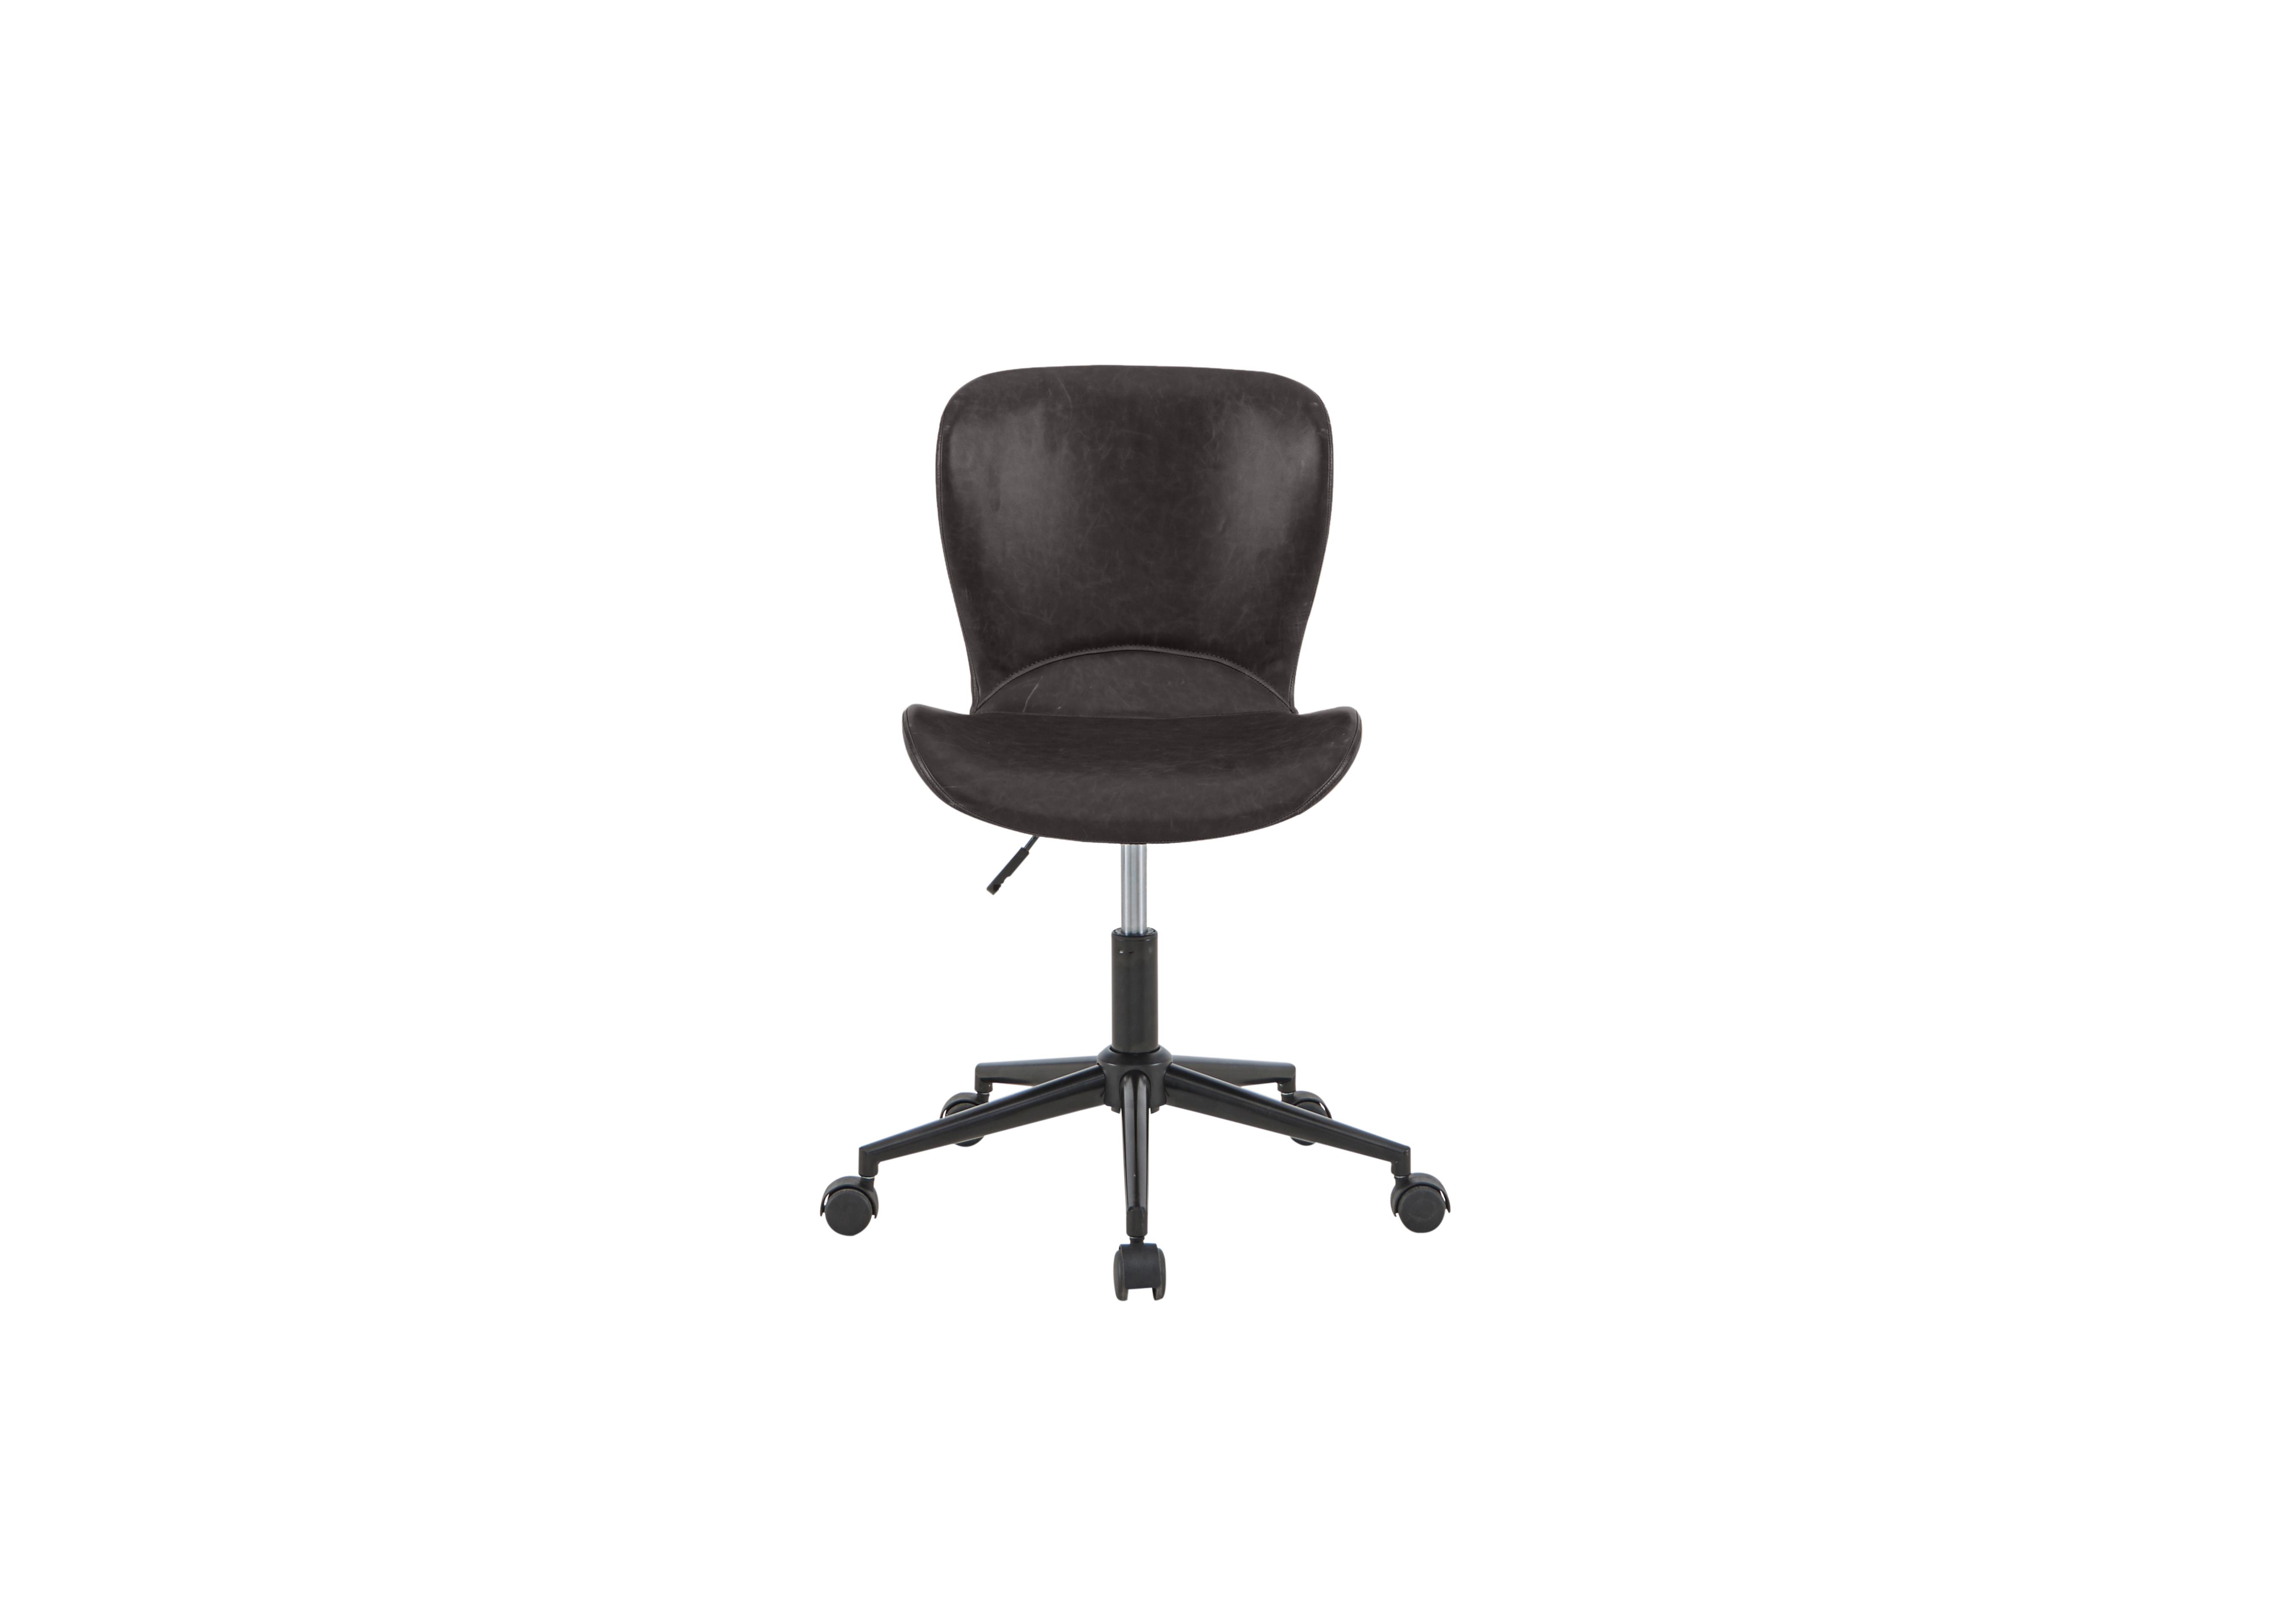 Holden Swivel Office Chair in Charcoal on Furniture Village